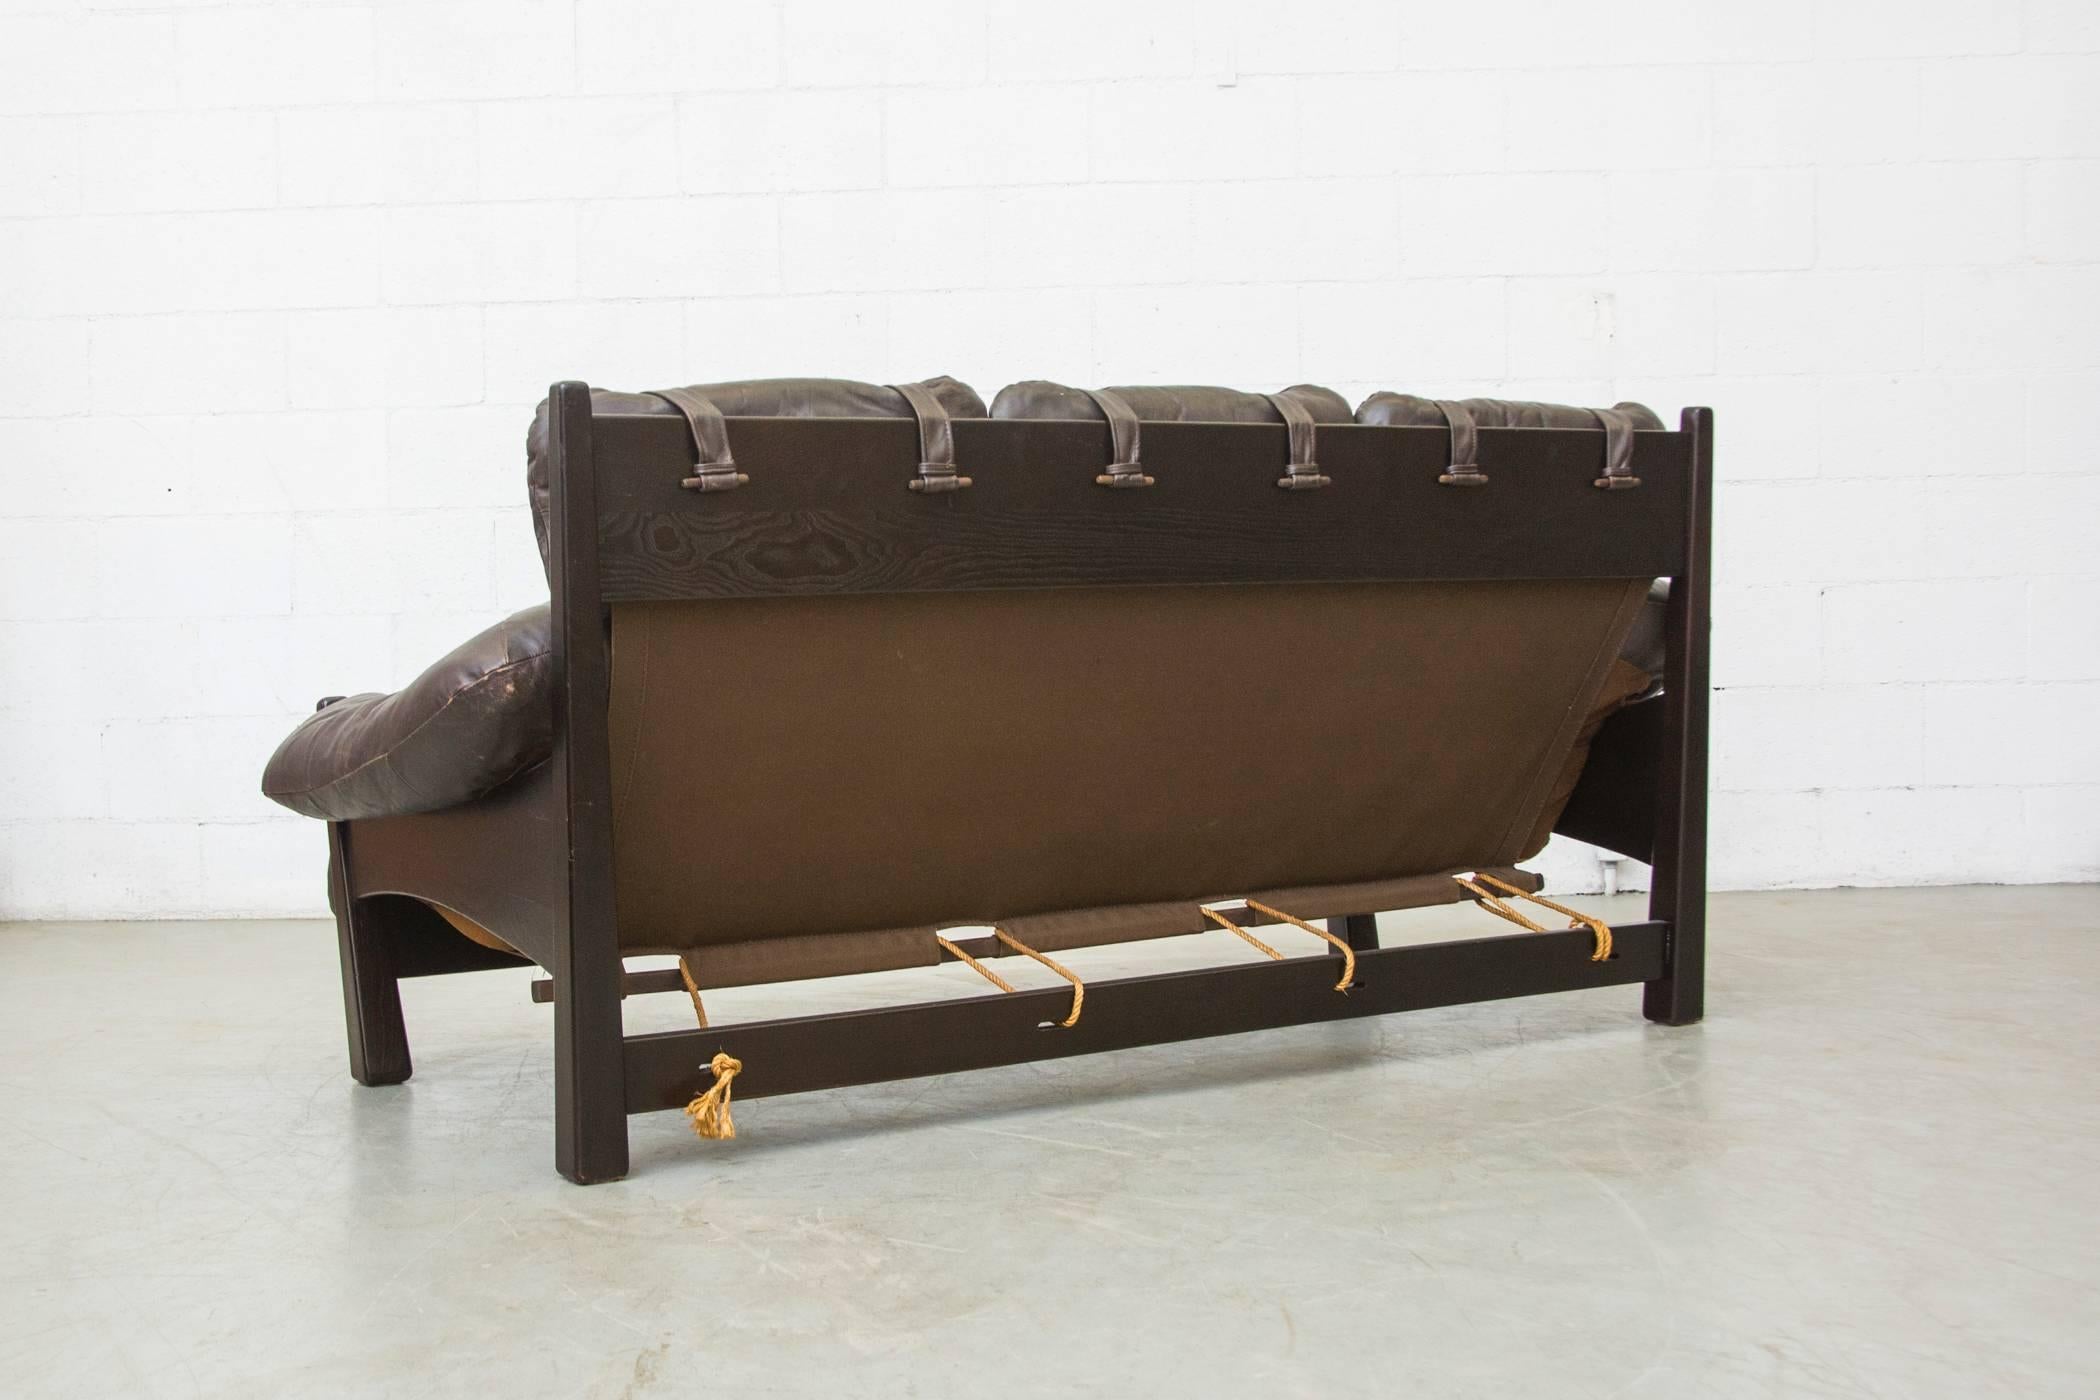 Stained Percival Lafer Style Three-Seat Leather Sofa by Gerard Van Den Berg